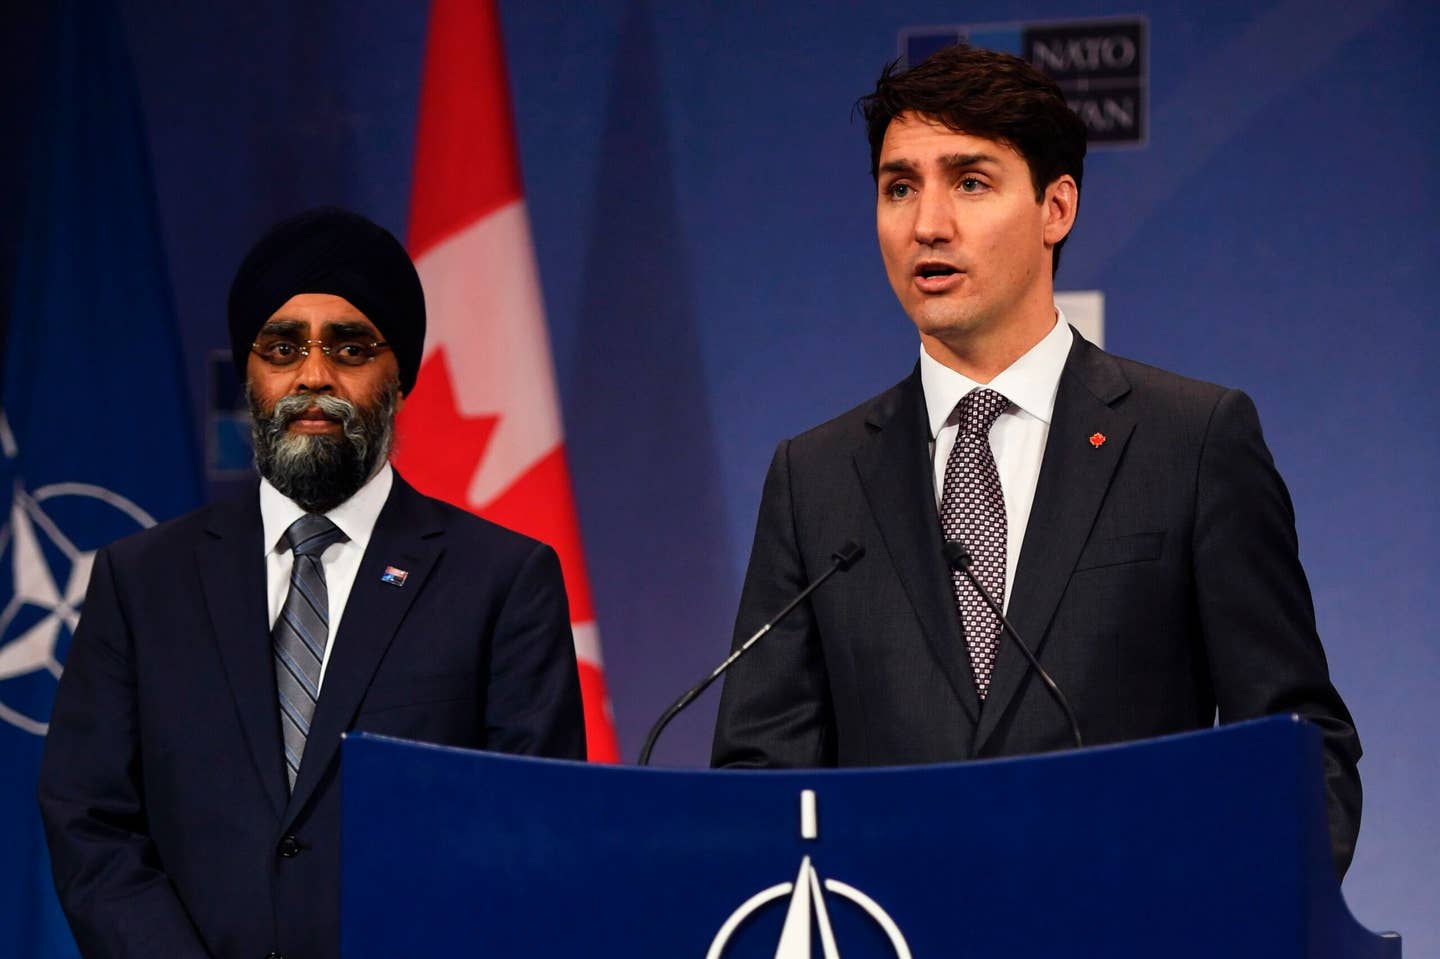 Canadian Prime Minister Justin Trudeau (right), flanked by Canadian Minister of Defense Harjit Singh Sajjan (left), at the NATO Summit in Brussels, in May 2017. <em>ERIC FEFERBERG/AFP via Getty Images</em>